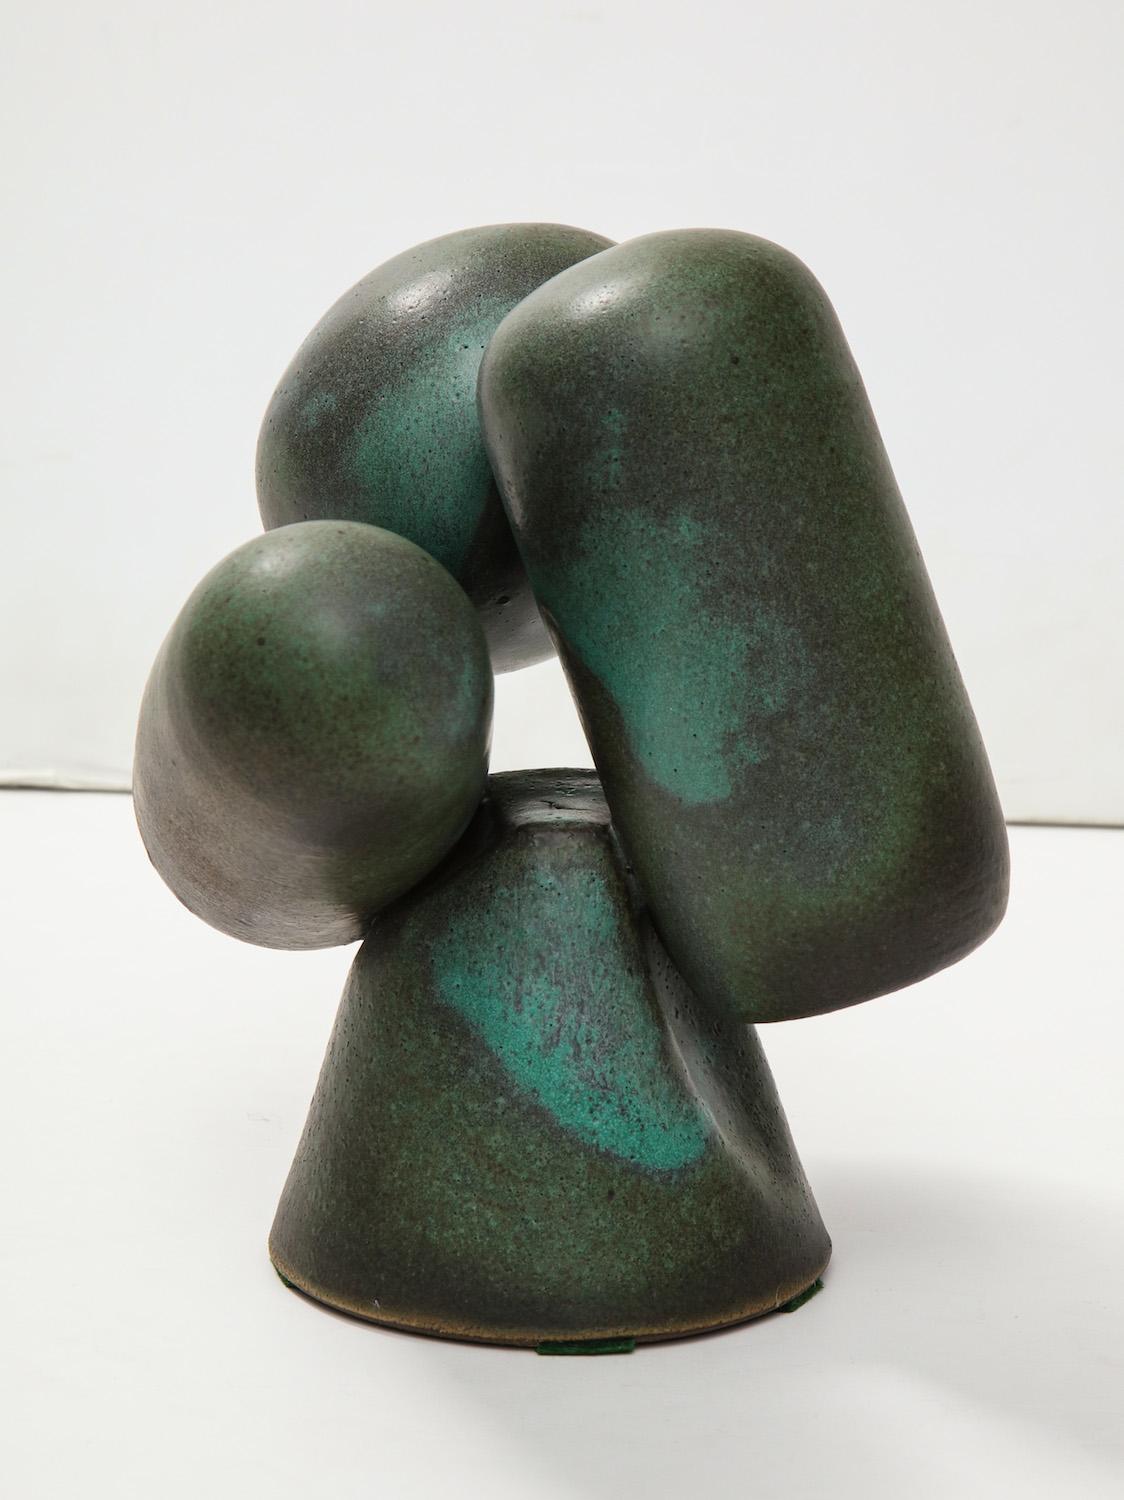 Three, wheel-thrown closed forms floating on a central cone base. Green glazes with textured surfaces. Artist signed on underside.